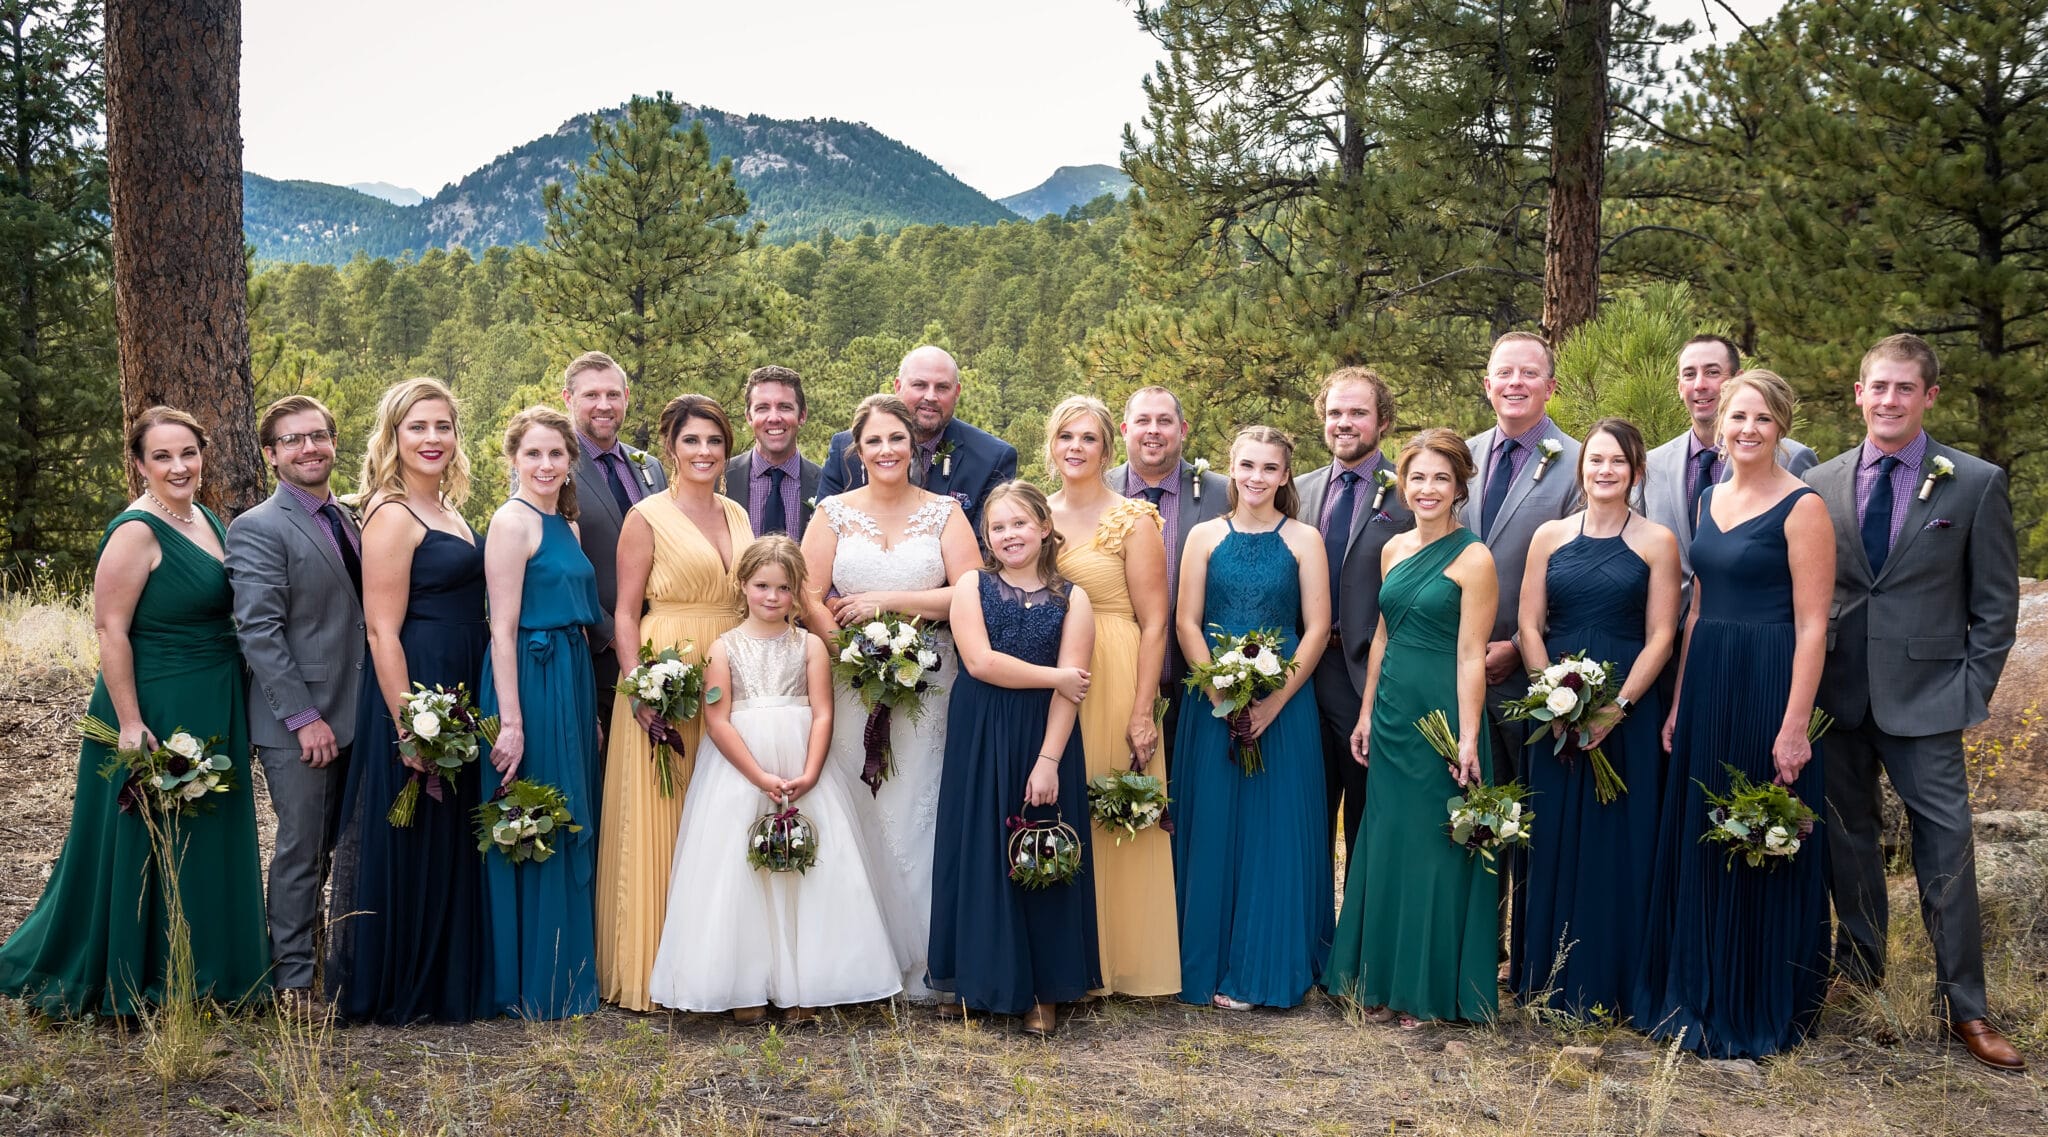 Nineteen member wedding party in complementary jewel tones that include burgundy, gold, emerald green, inky blue, and navy.